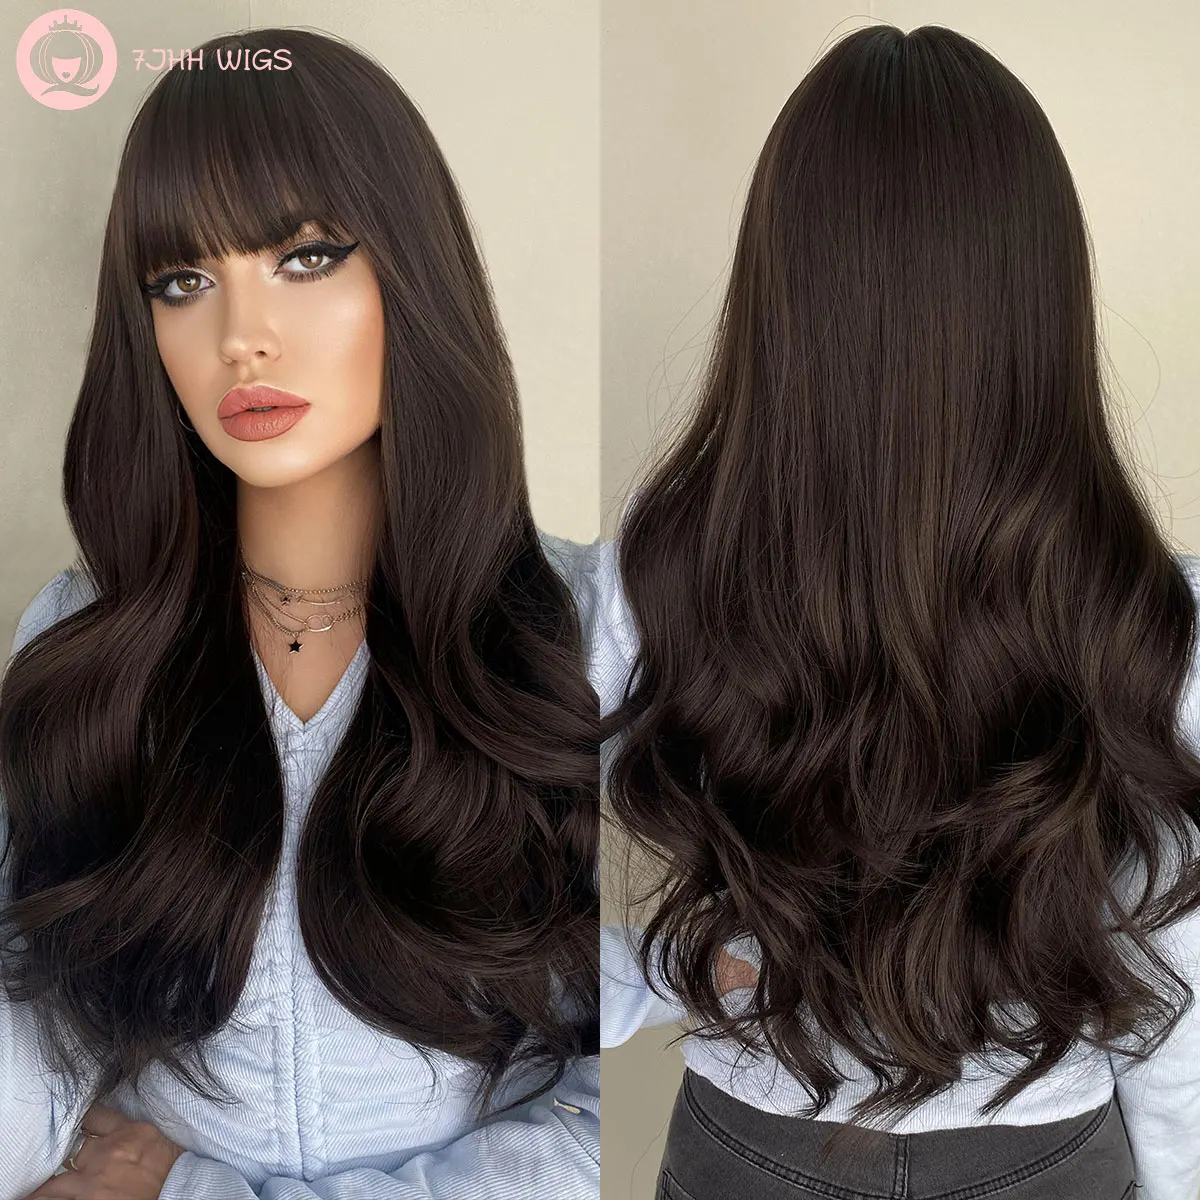 

Curly Wig with Bangs Natural Black Wig Long for Women Dark Brown Long Wavy Synthetic Wig Factory 26 Inch Daily Hair Pelucas